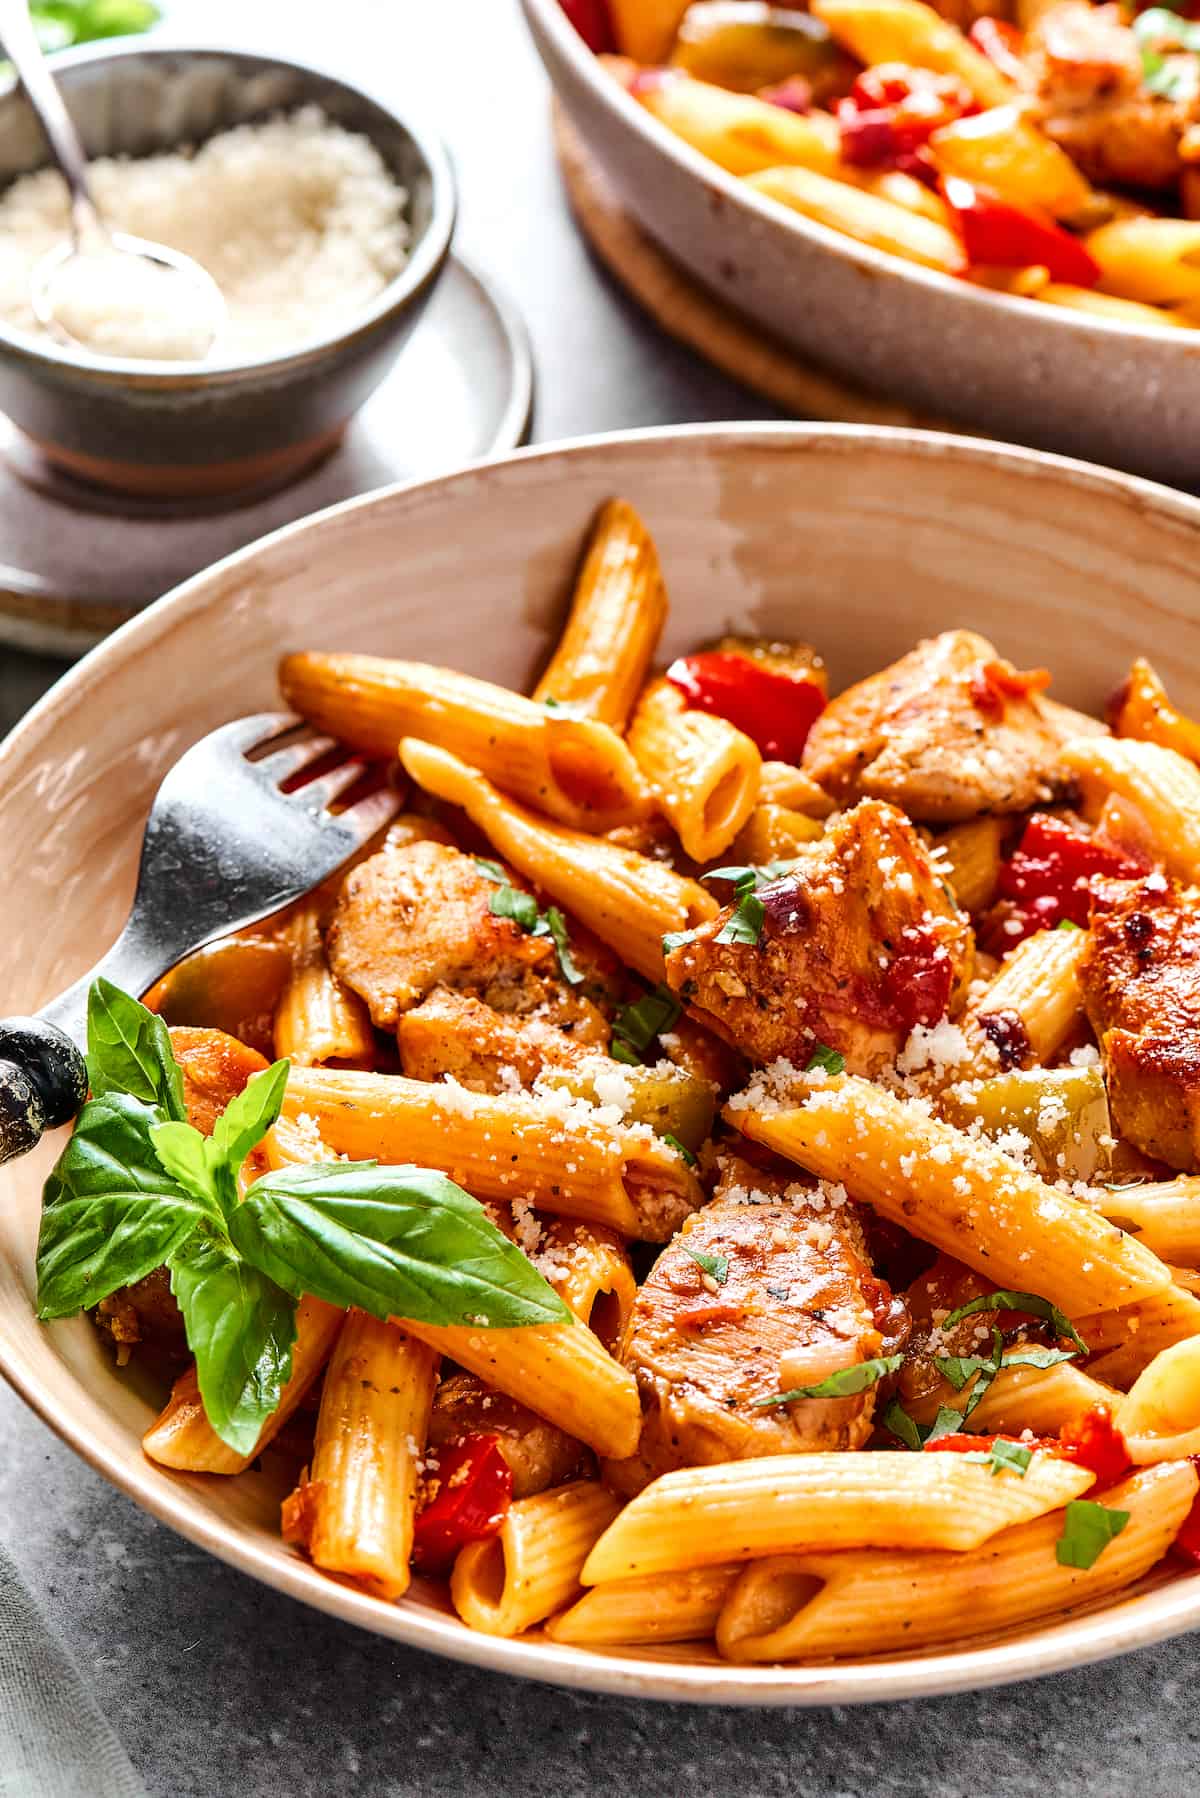 Penne pasta with vegetables and chicken.